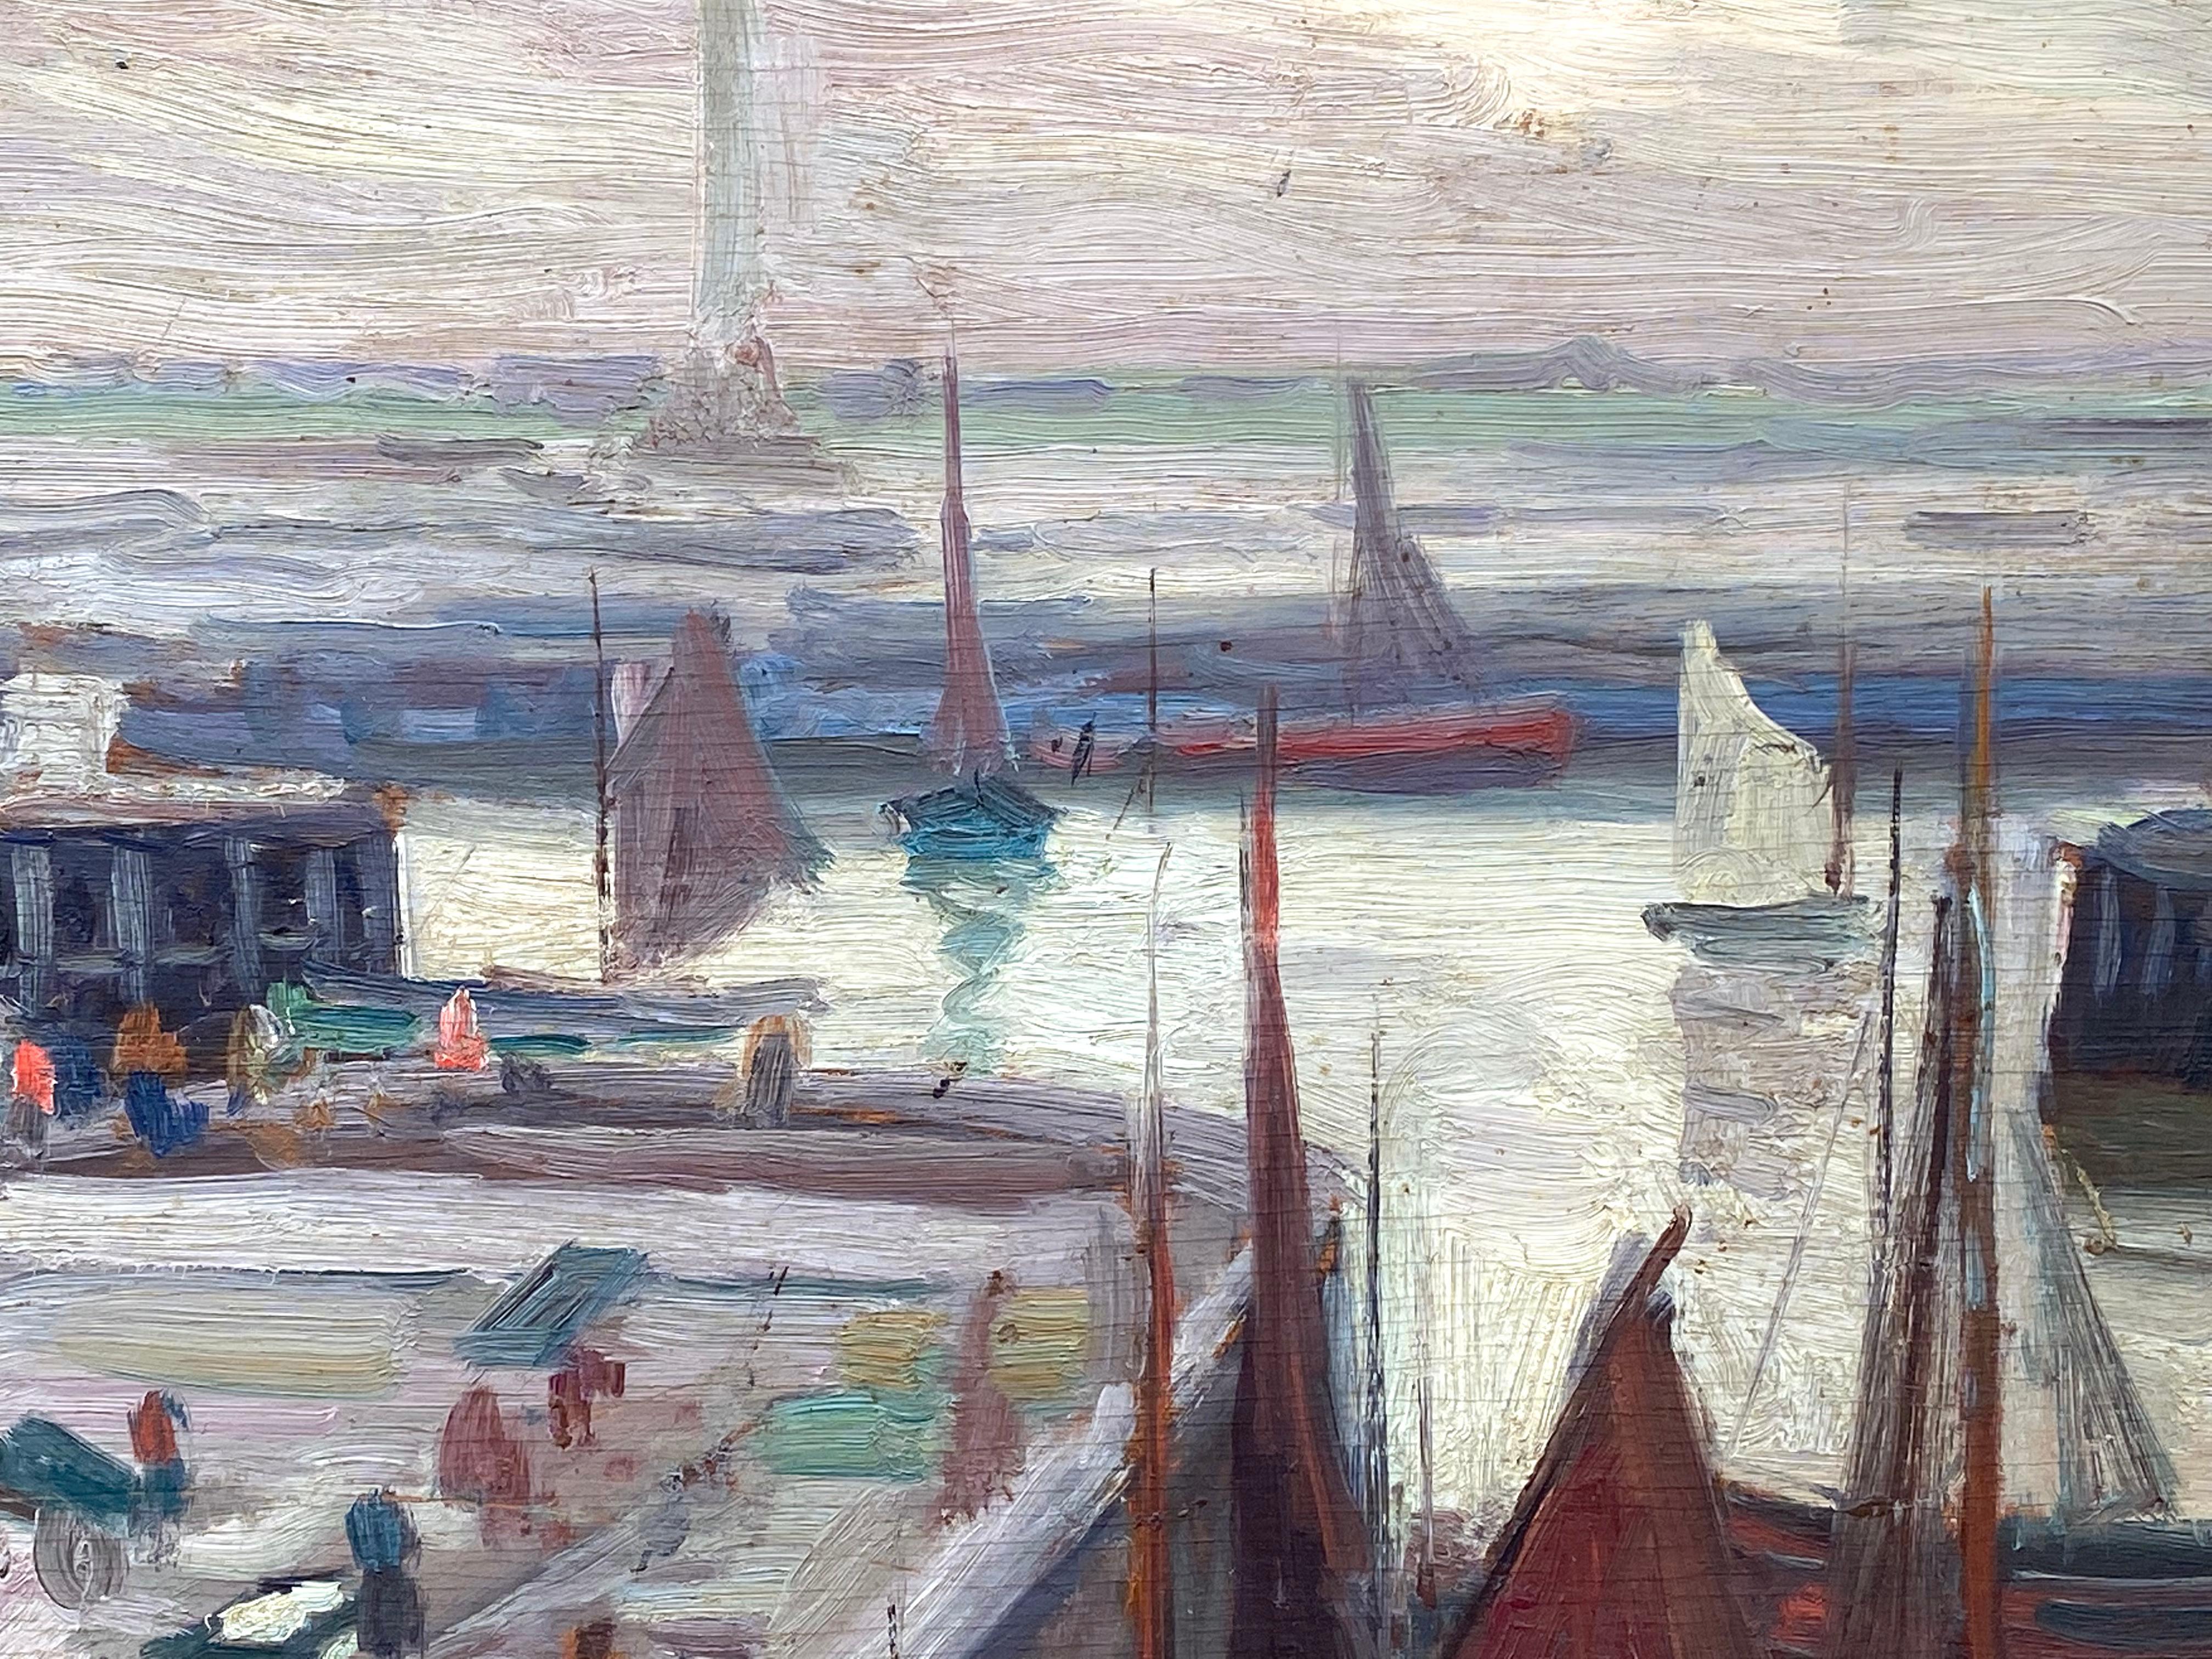 “Port of Ostend, Belgium” - Post-Impressionist Painting by Louis Clesse